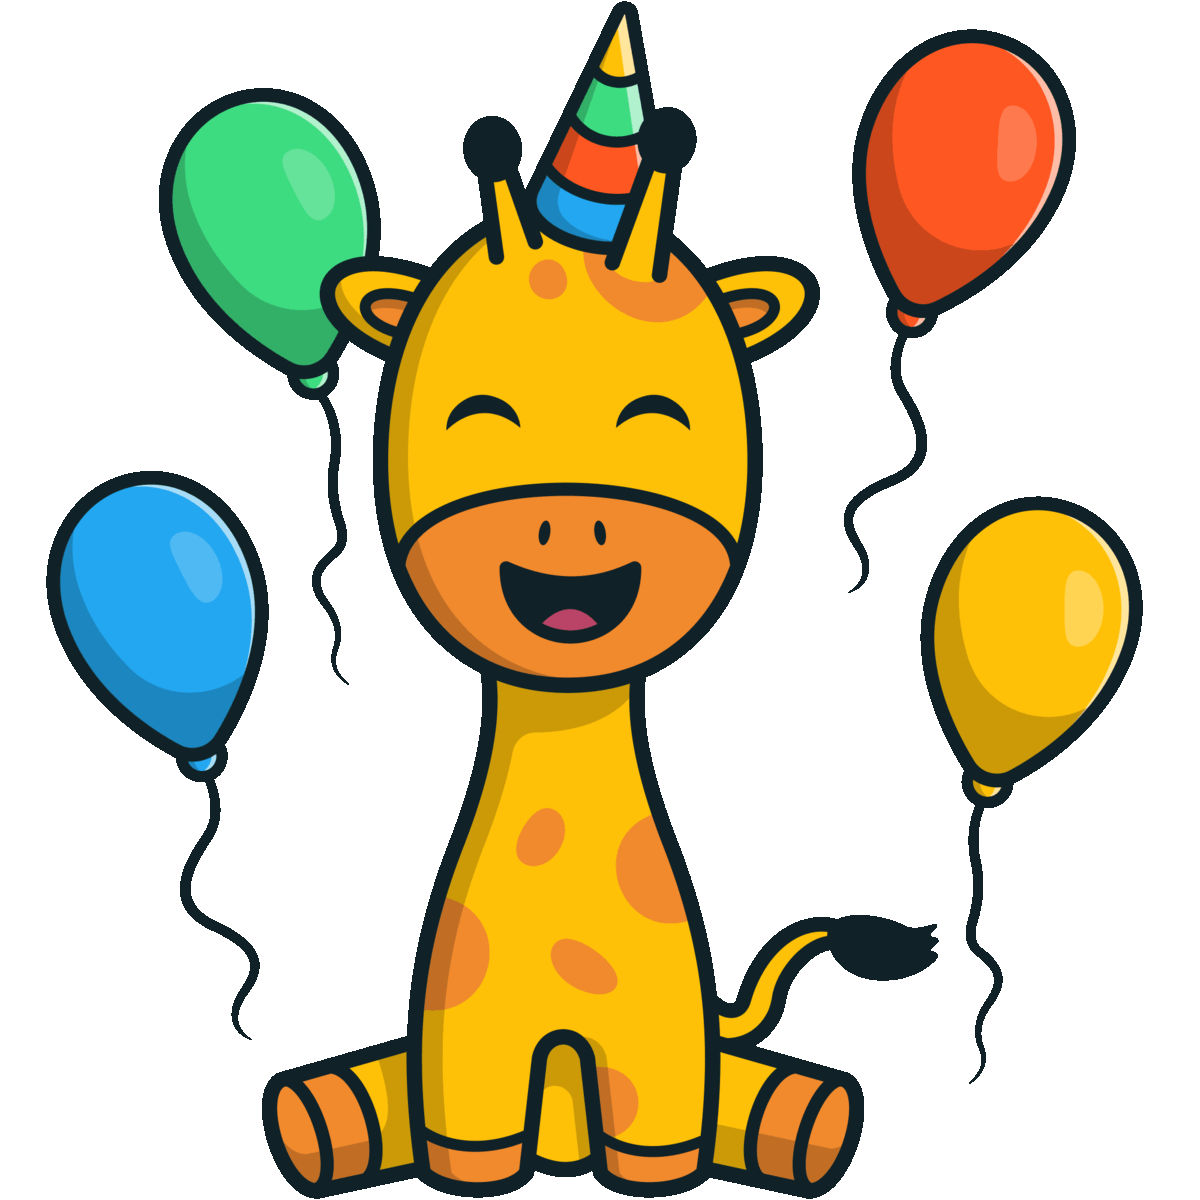 Giraffe illustration with a party hat and various balloons